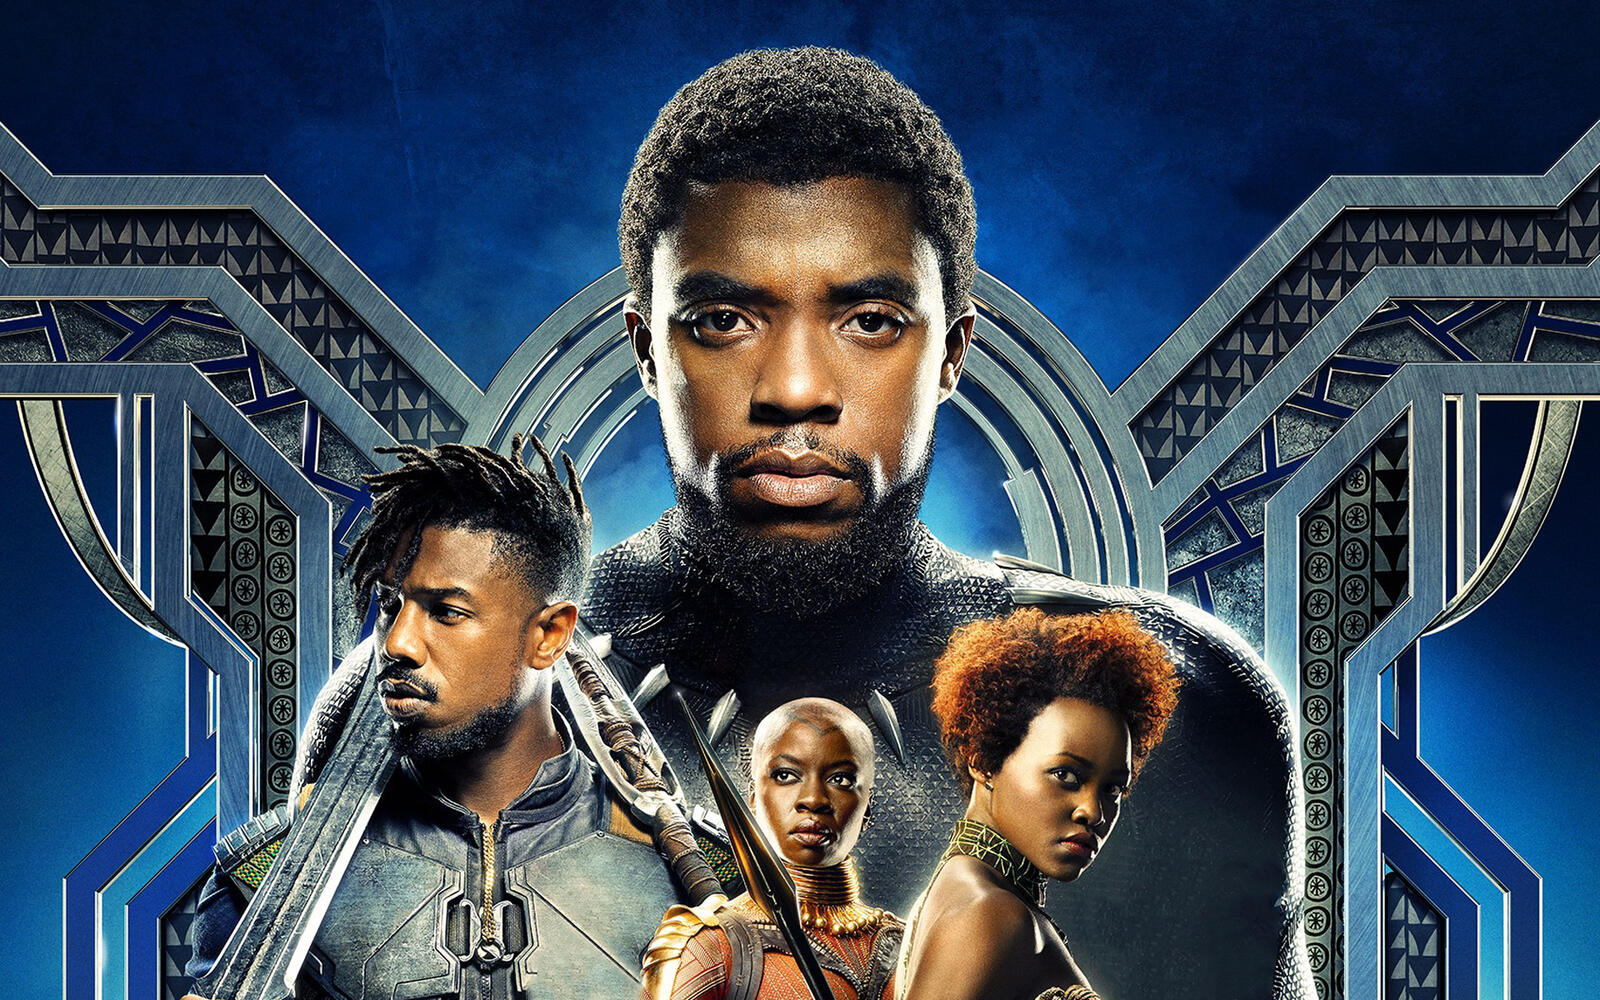 Wallpapers movies a black panther actors on the desktop